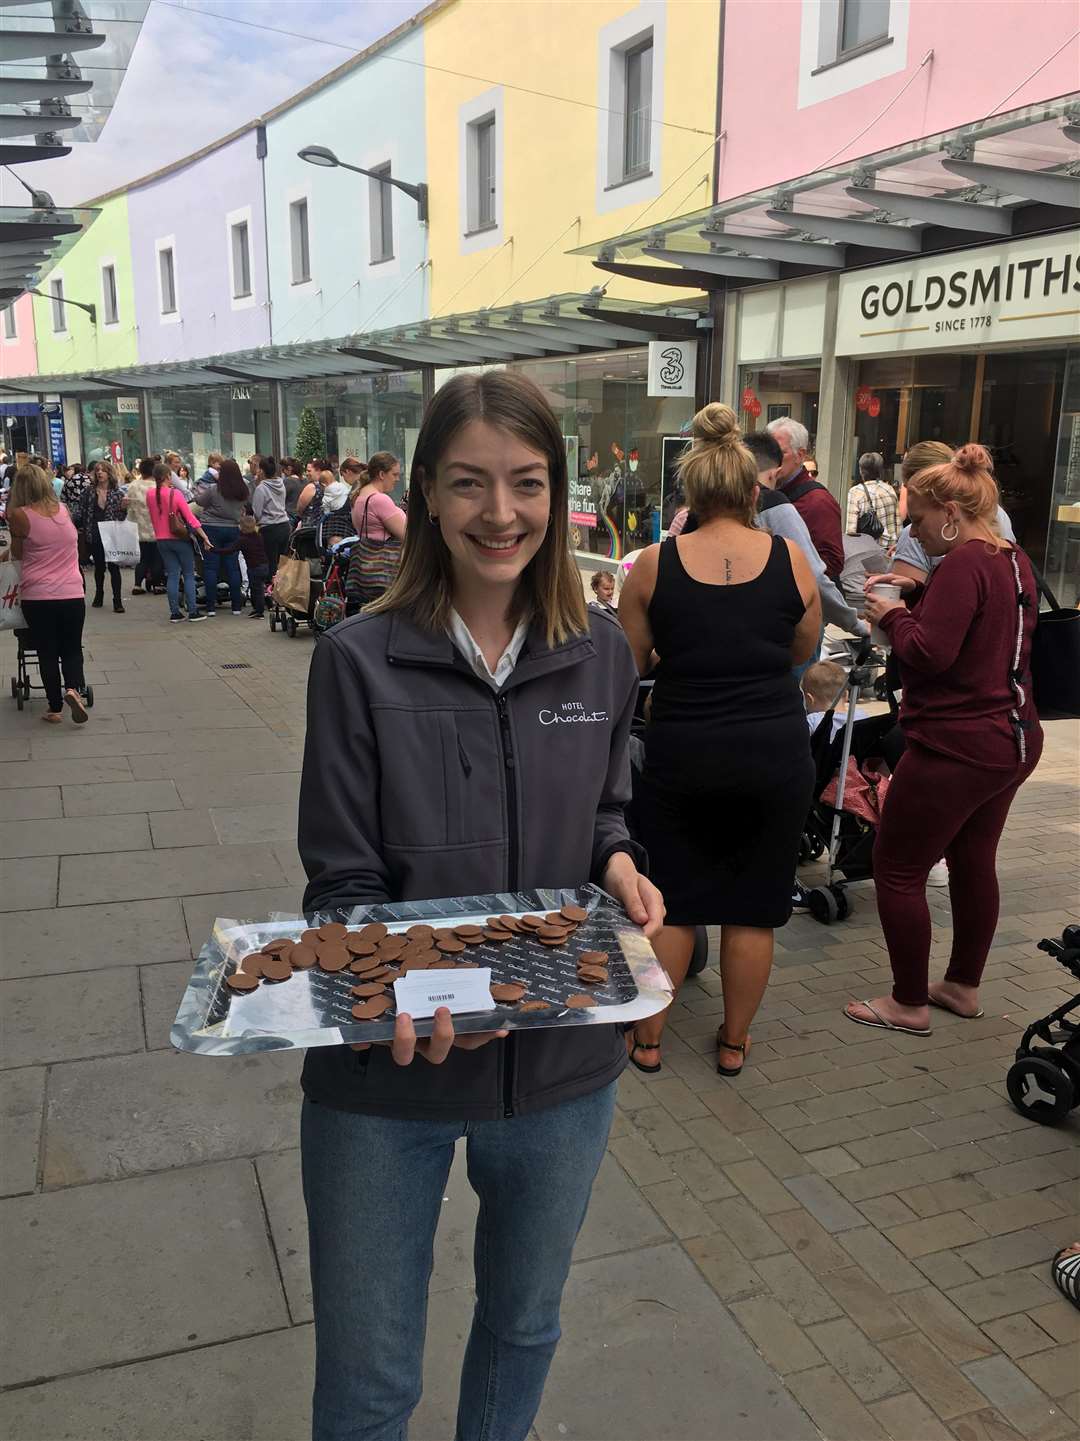 Louisa Harris handed out samples from Hotel Chocolat to the crowd (3038363)